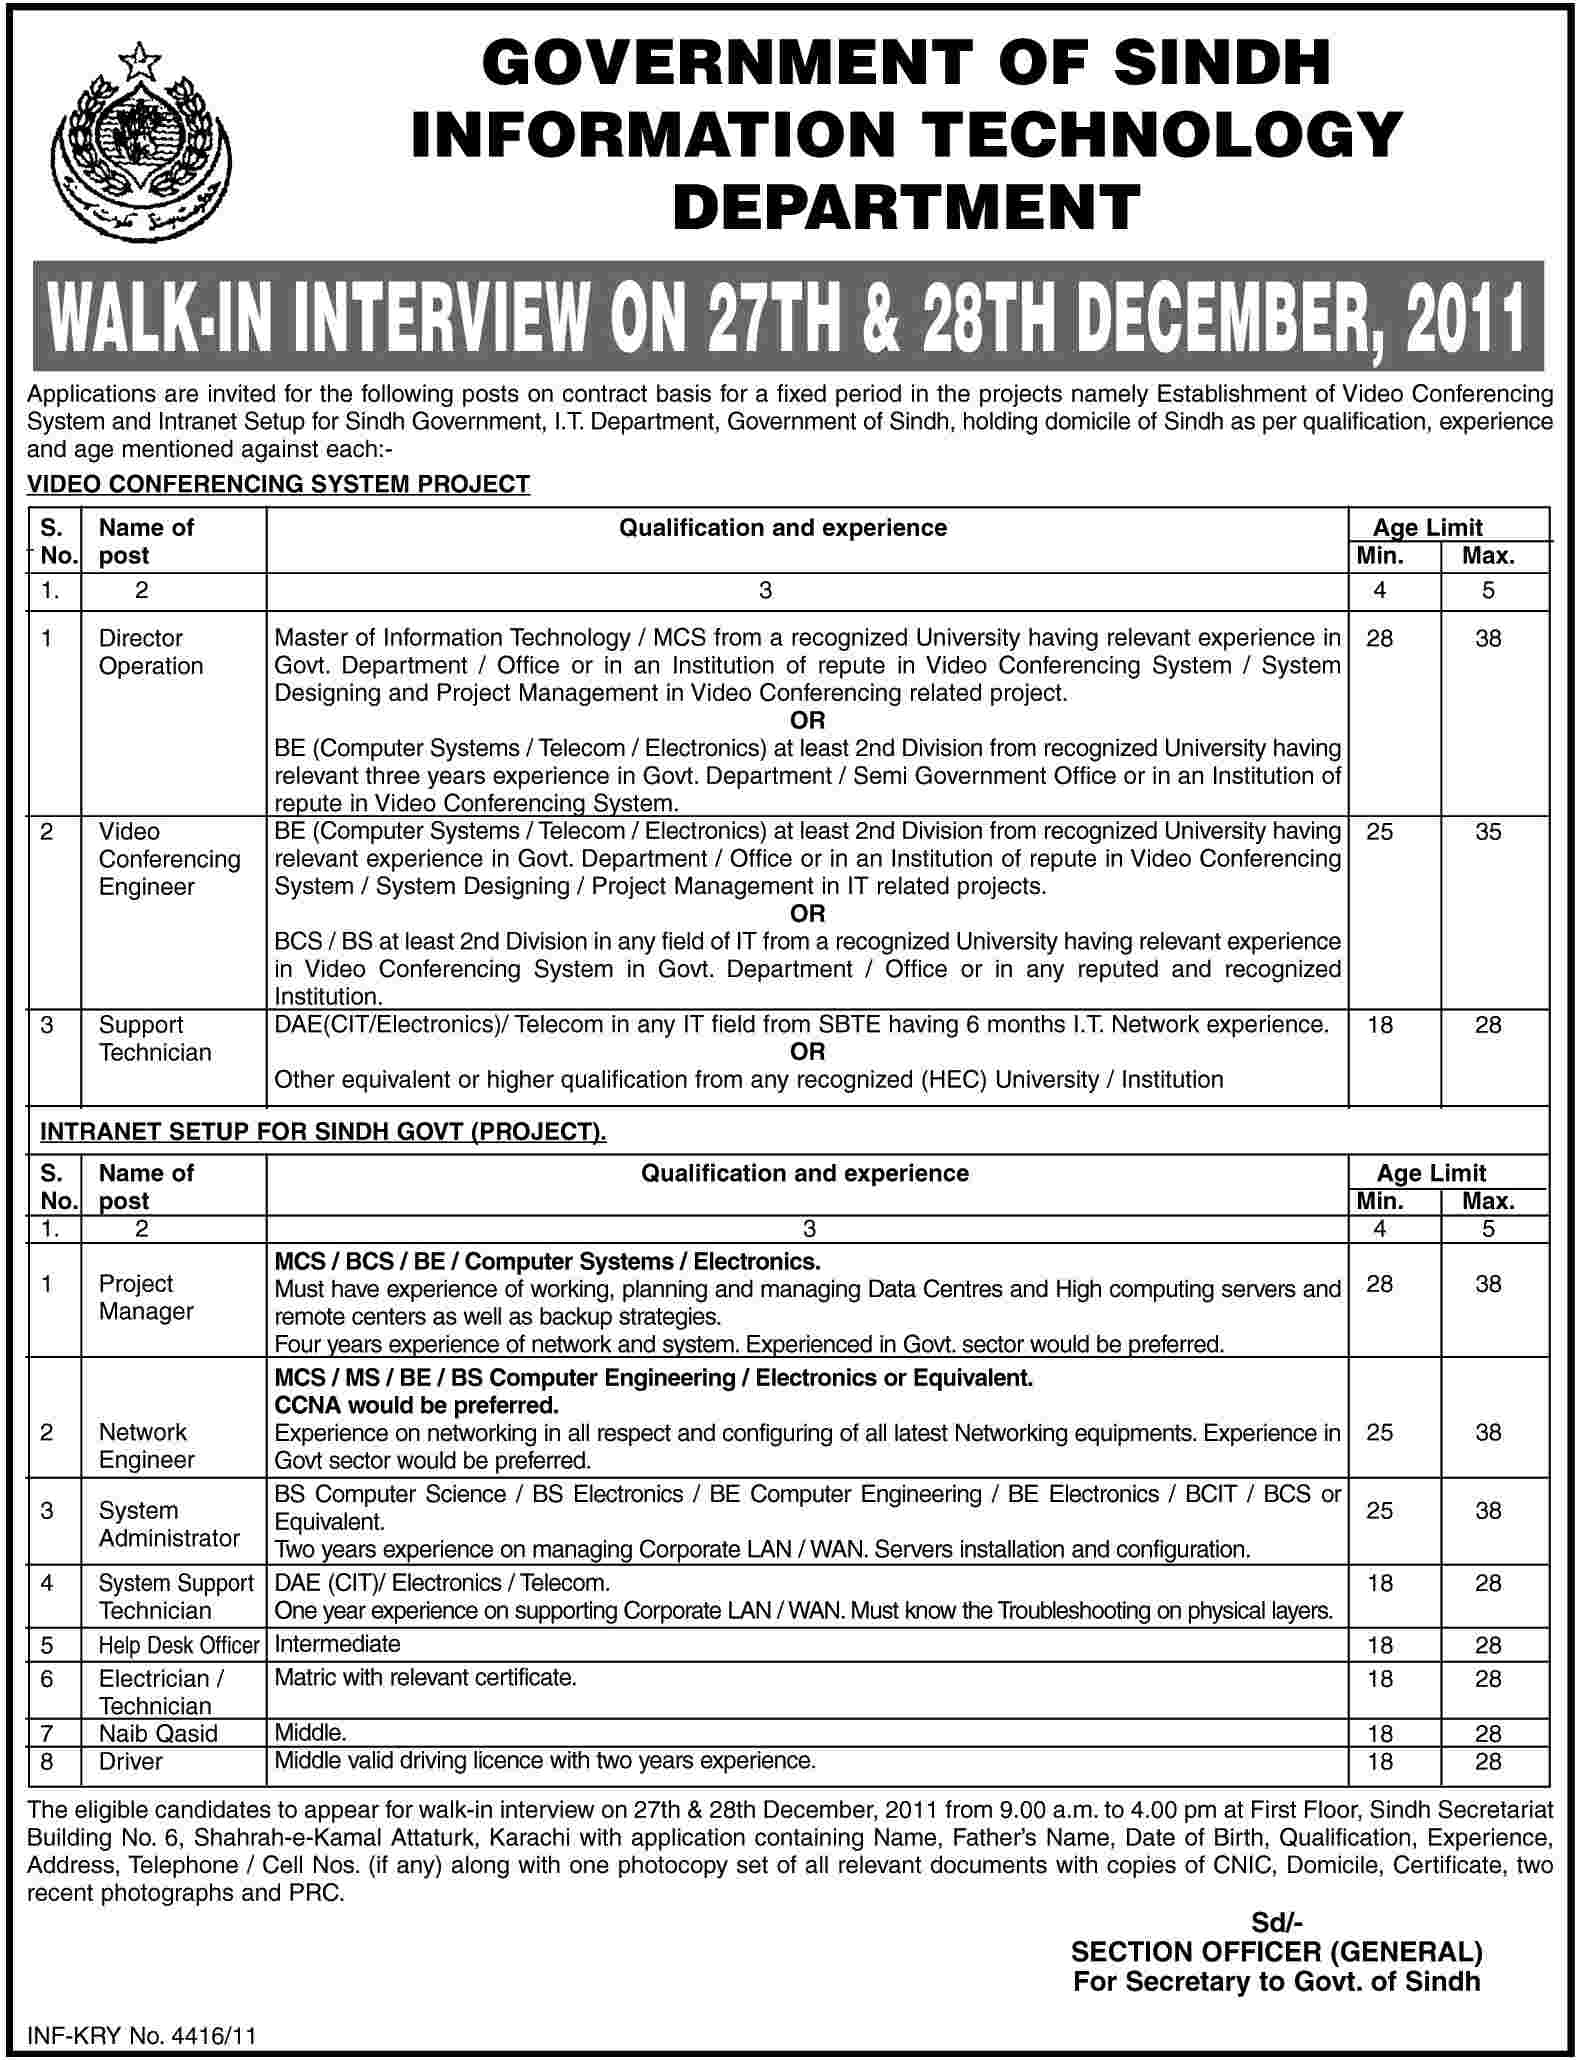 Information Technology Department, Government of Sindh Job Opportunities